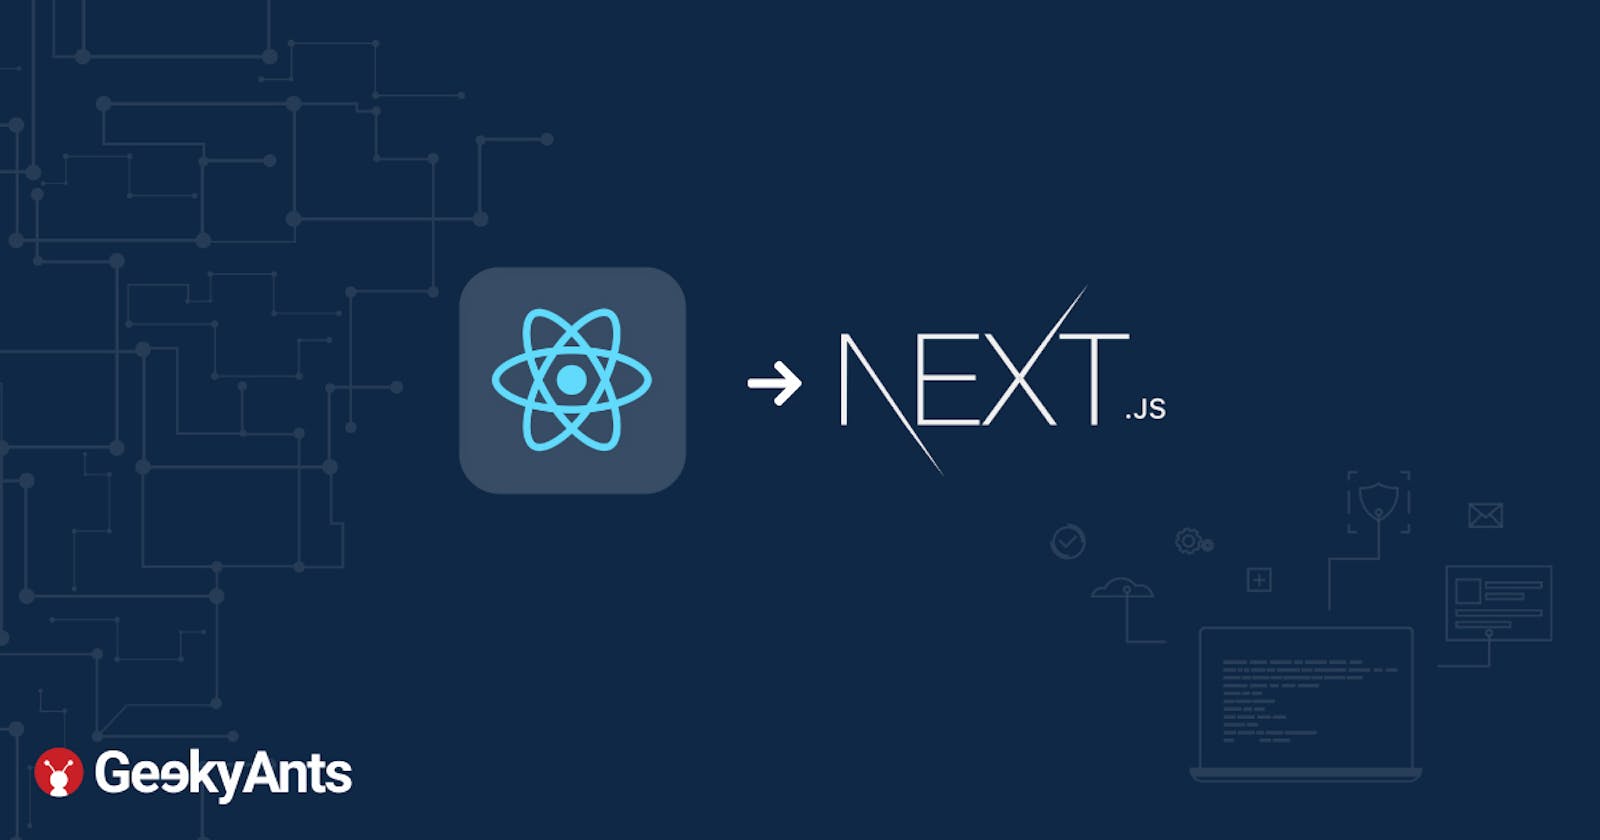 Migrating From create-react-app to Next.js